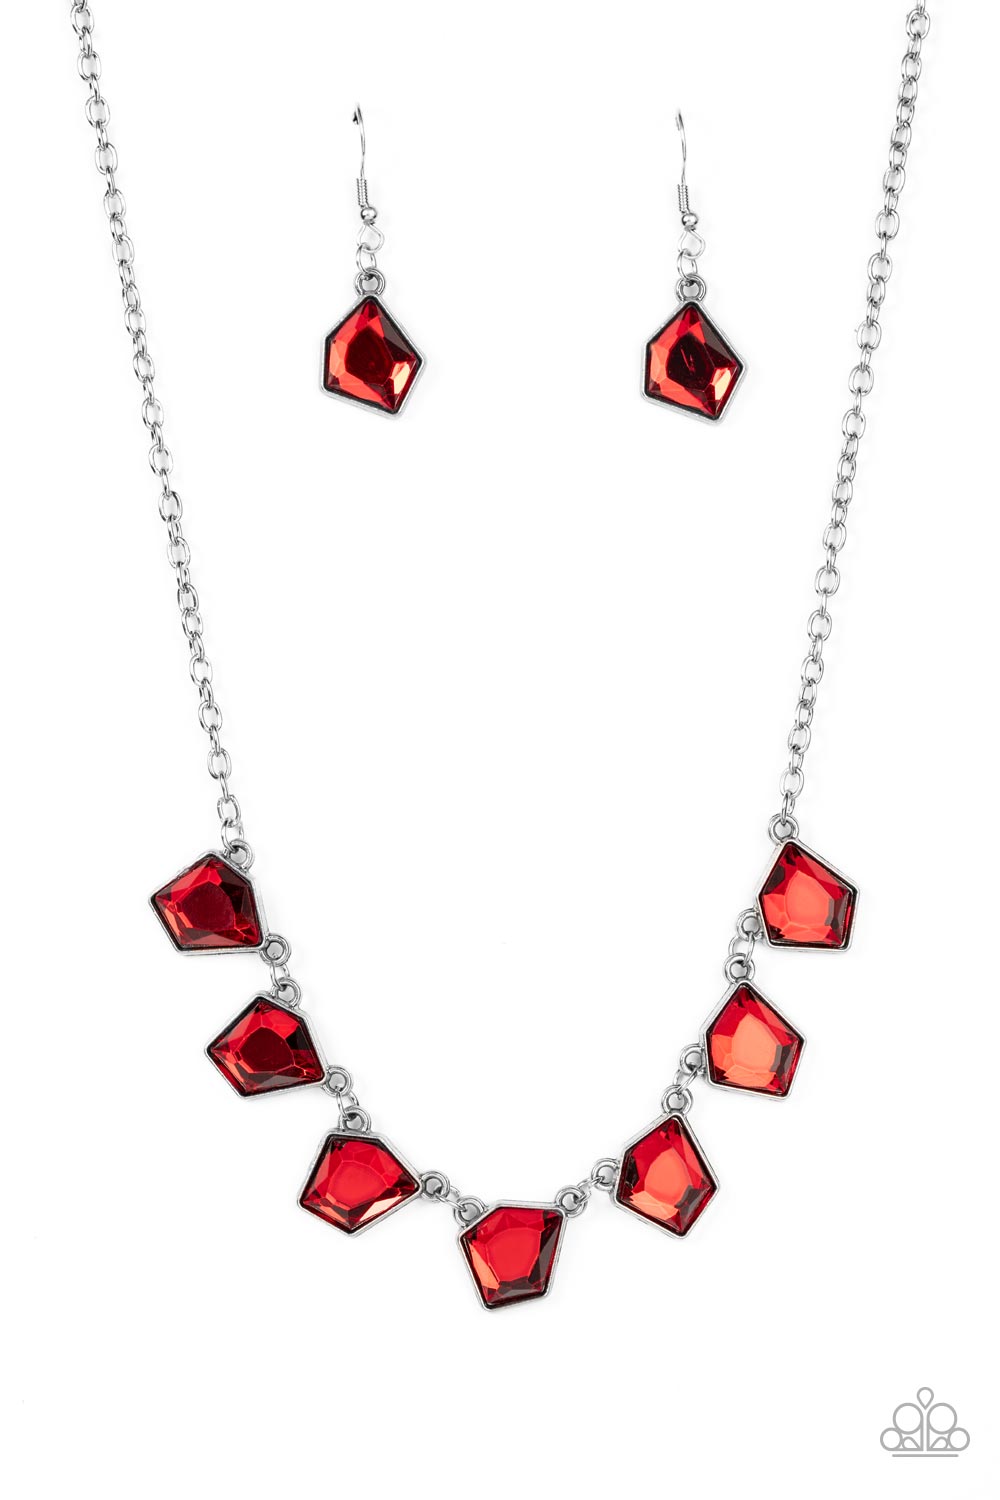 Experimental Edge Red Rhinestone Necklace - Paparazzi Accessories- lightbox - CarasShop.com - $5 Jewelry by Cara Jewels